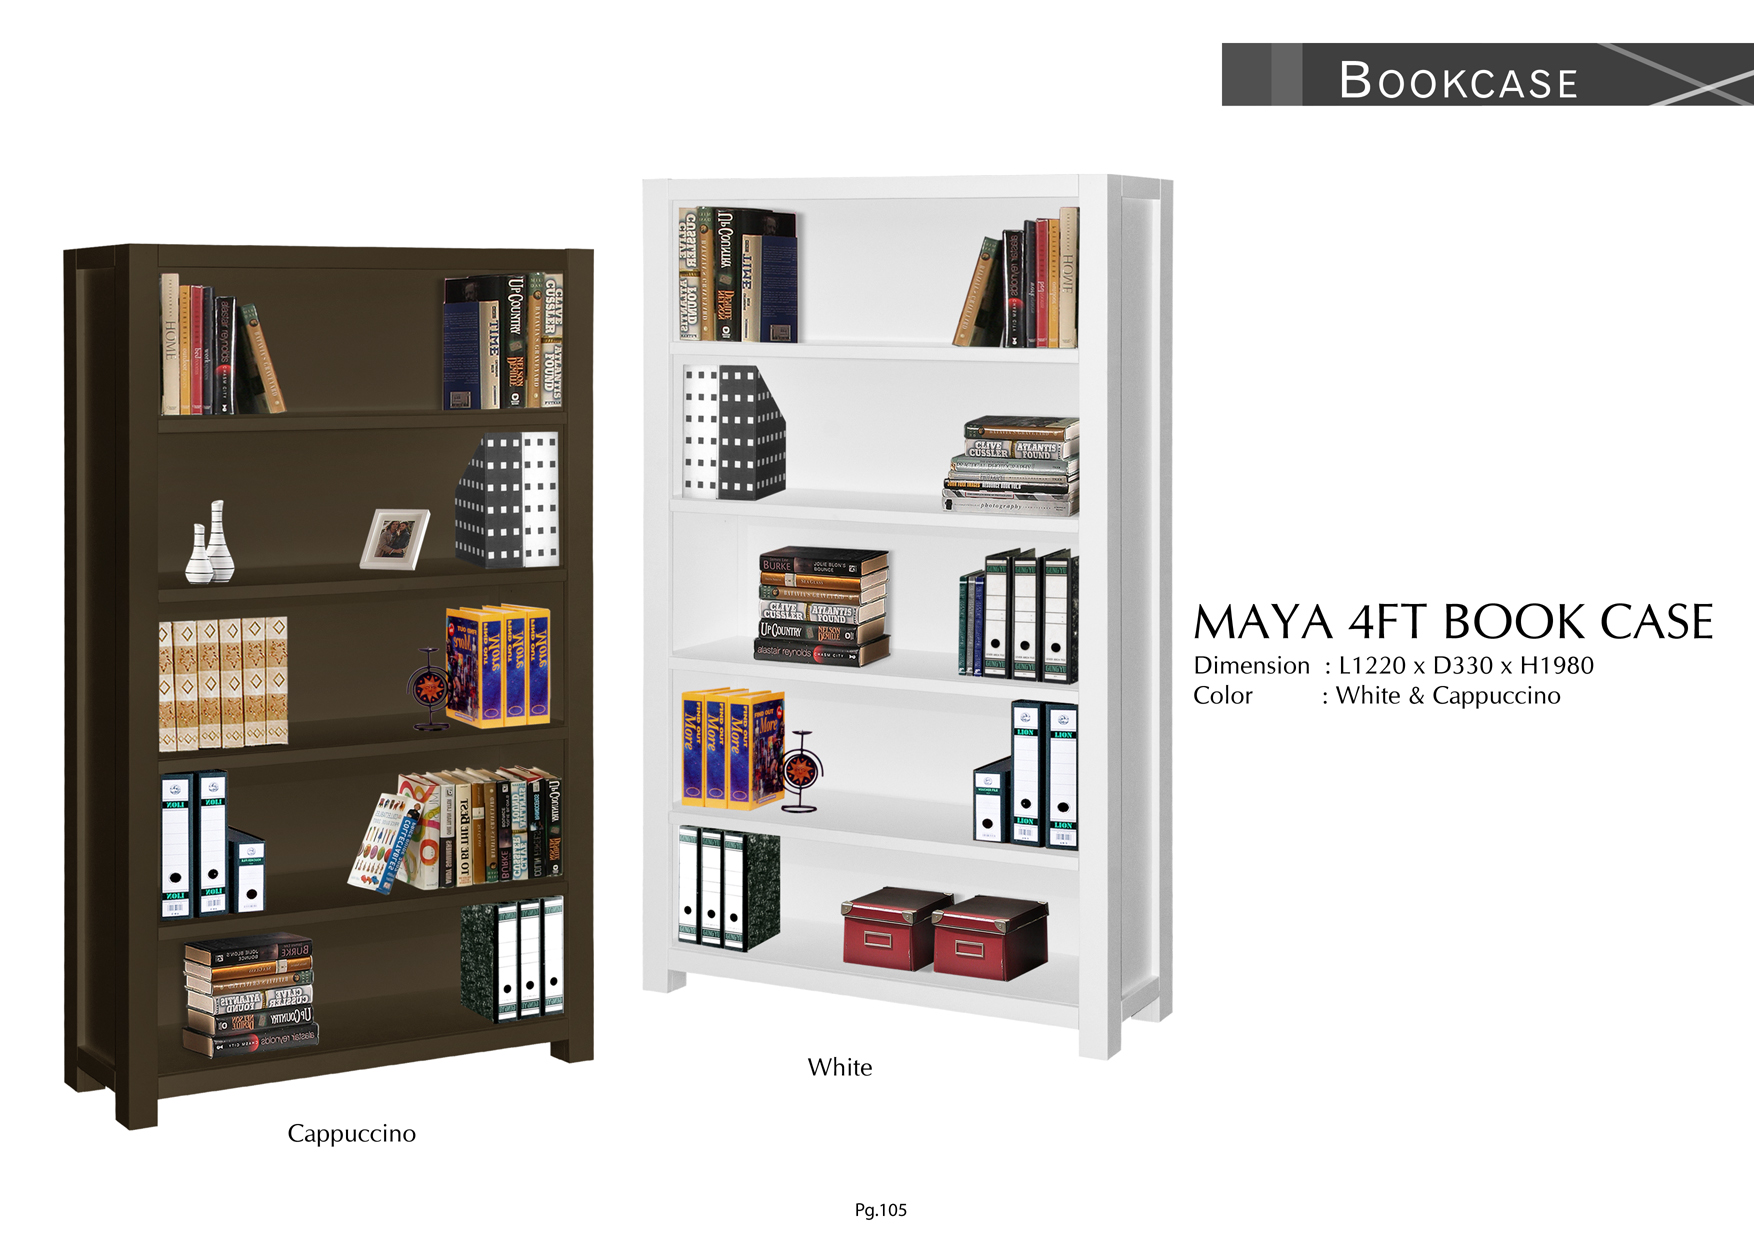 Product: PG105. MAYA 4FT BOOK CASE